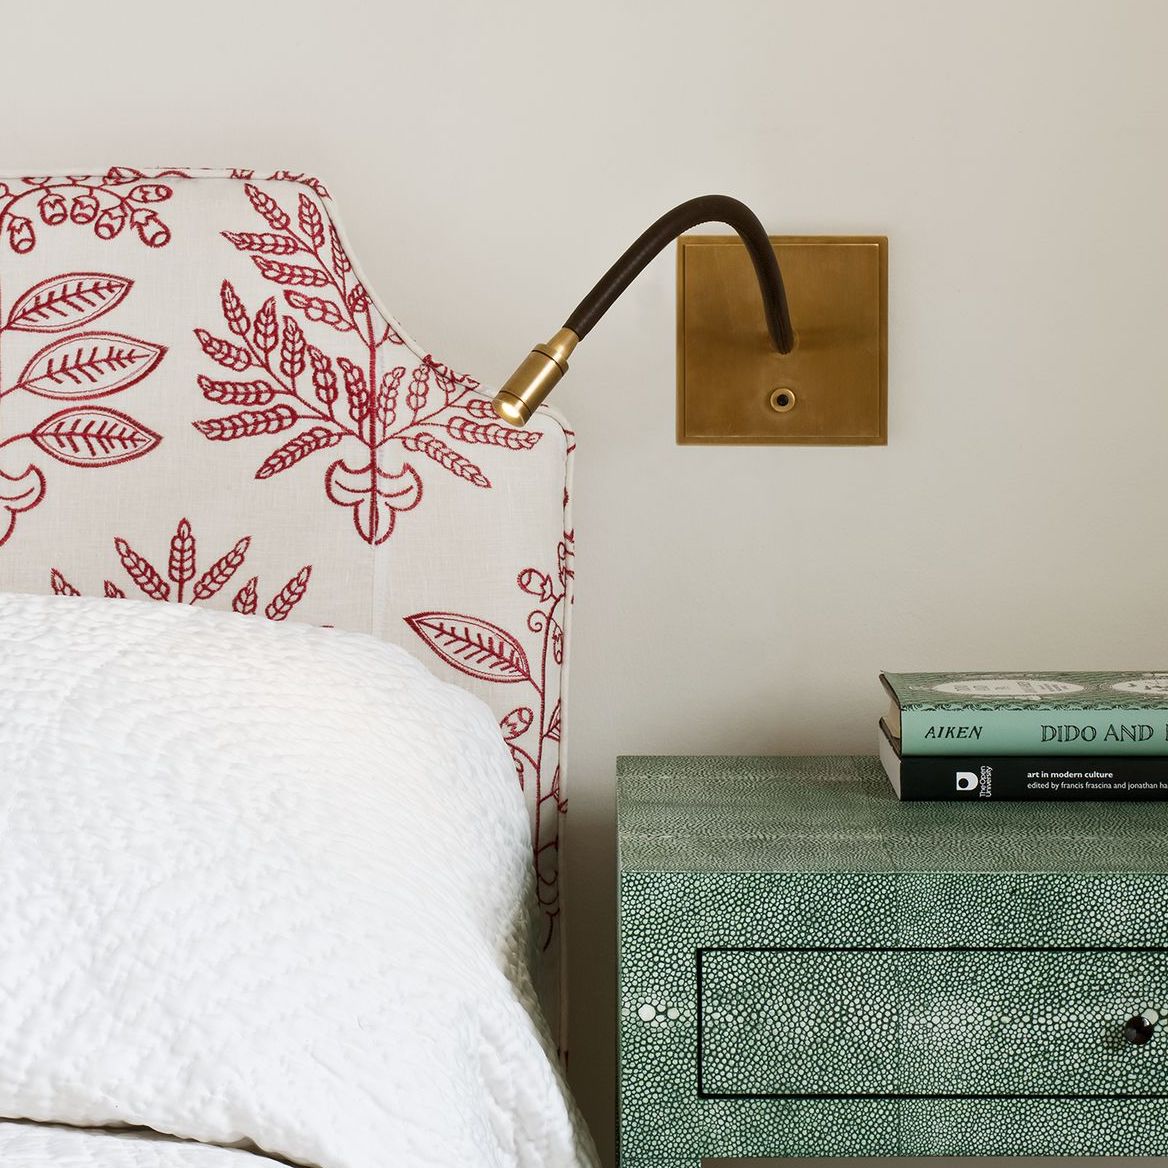 Brass and leather LED reading wall light beside bed and table with books